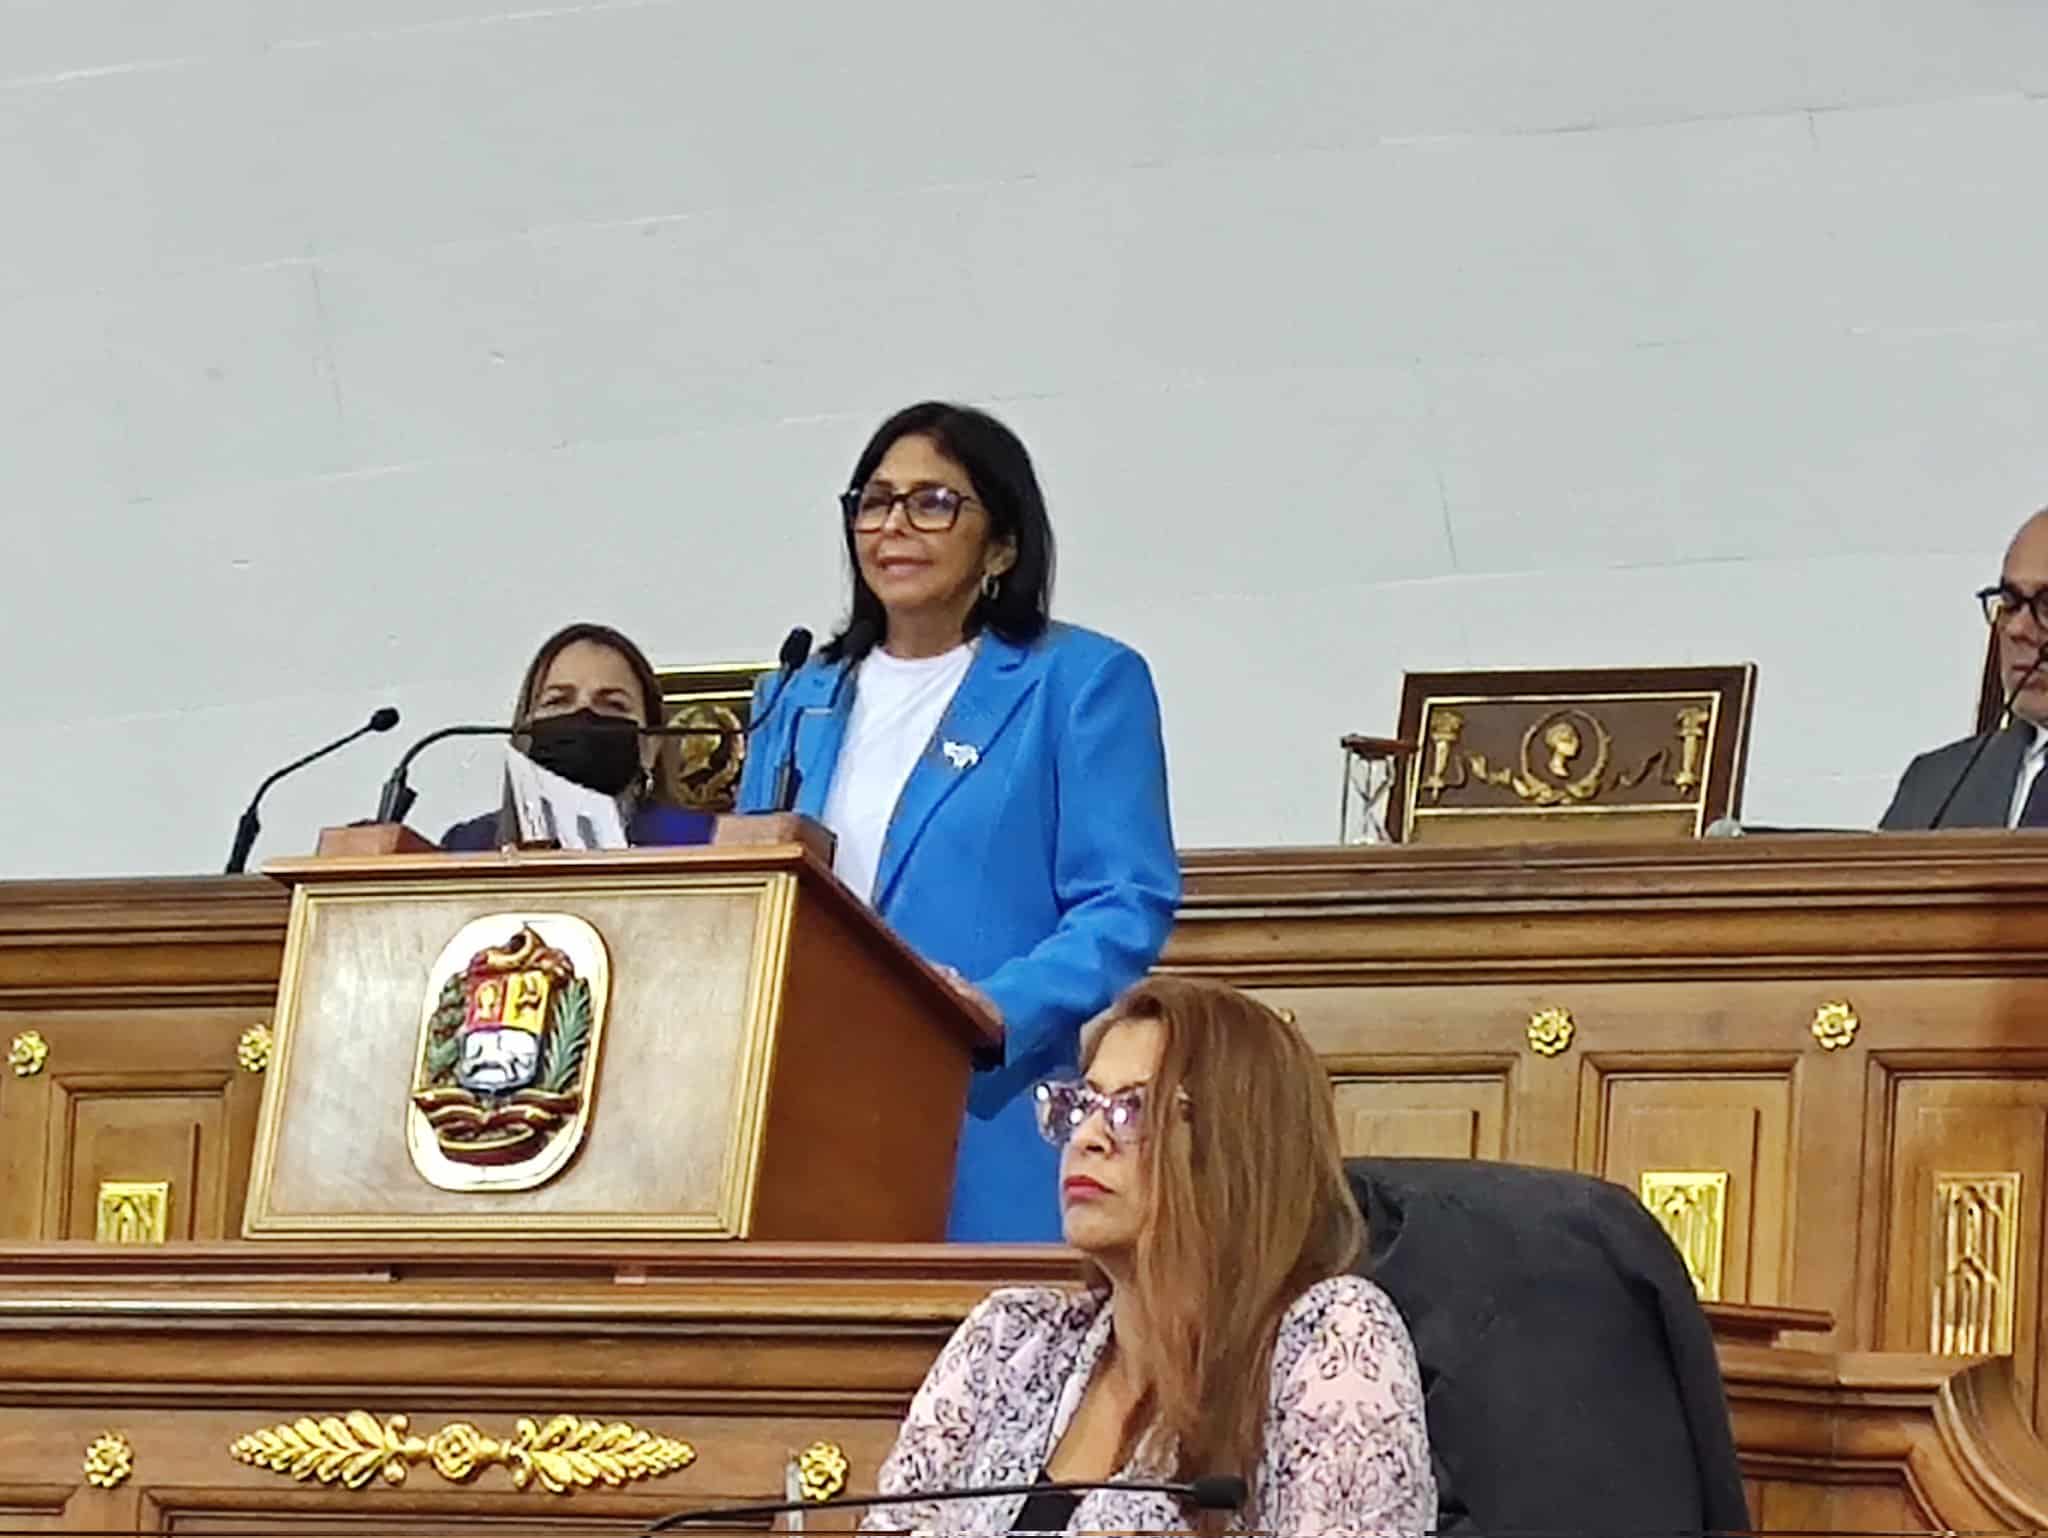 The vice president of Venezuela, Delcy Rodríguez, in the National Assembly for discussion of the Budget Bill 2023. Photo: Twitter/@delcyrodriguezv.